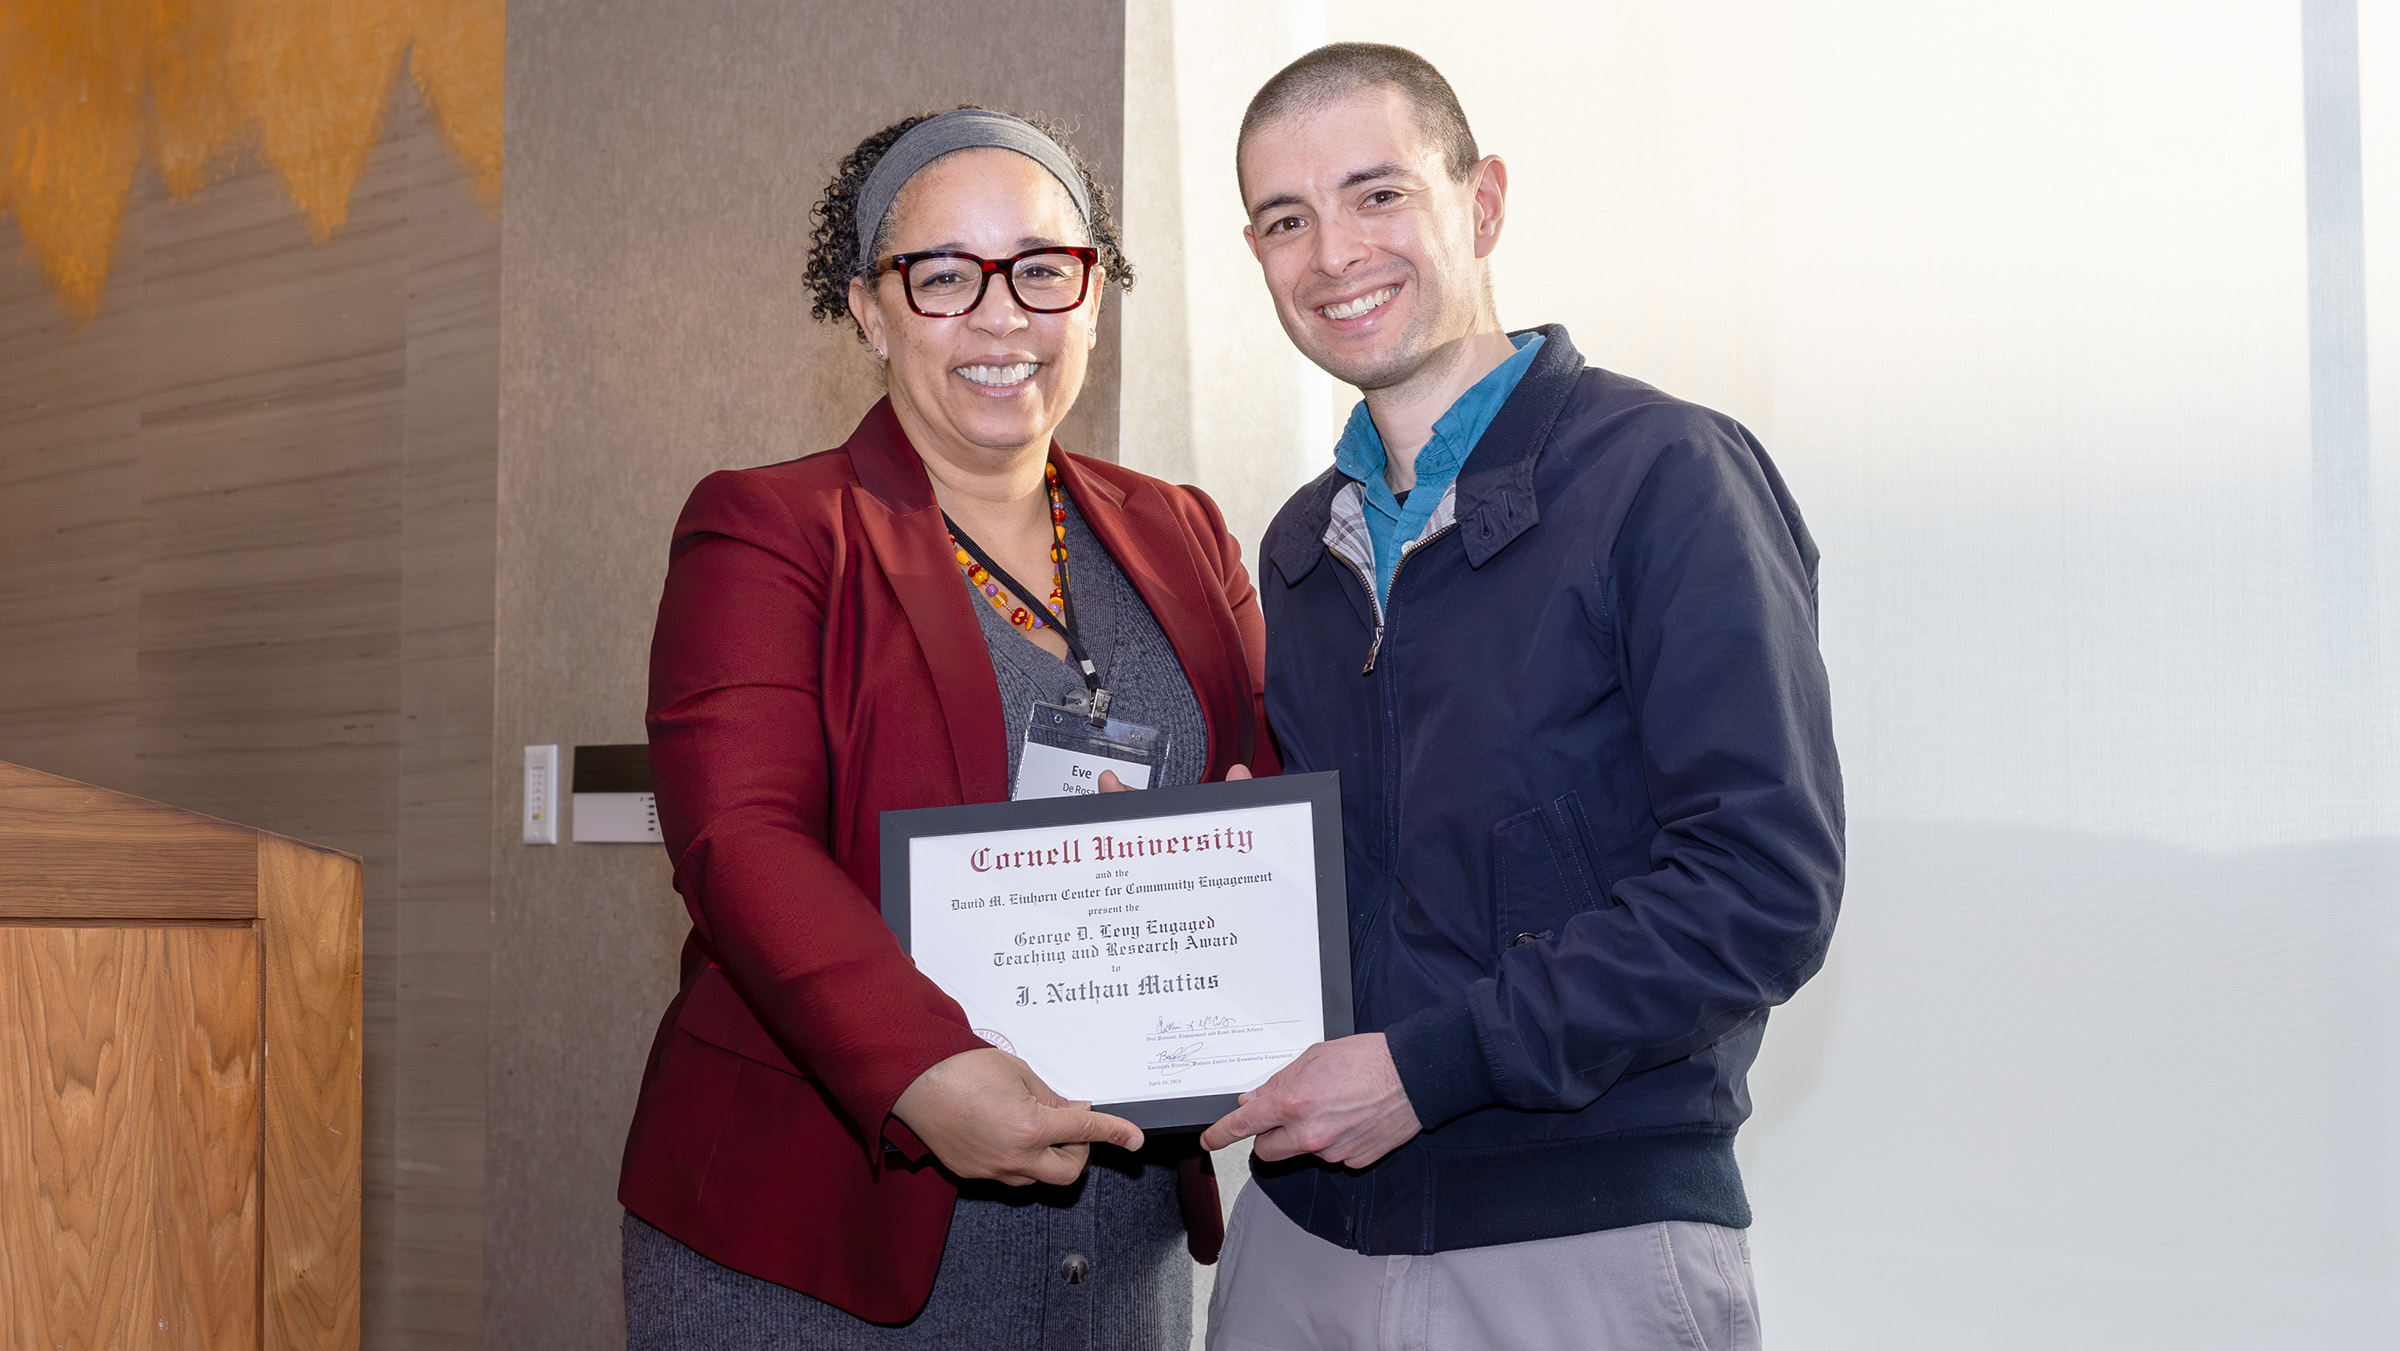 Matias (right) receives the Levy Award from Eve De Rosa, dean of faculty and the Mibs Martin Follett Professor in Human Ecology, at the Einhorn Center’s 2nd Annual Community Engagement Awards.